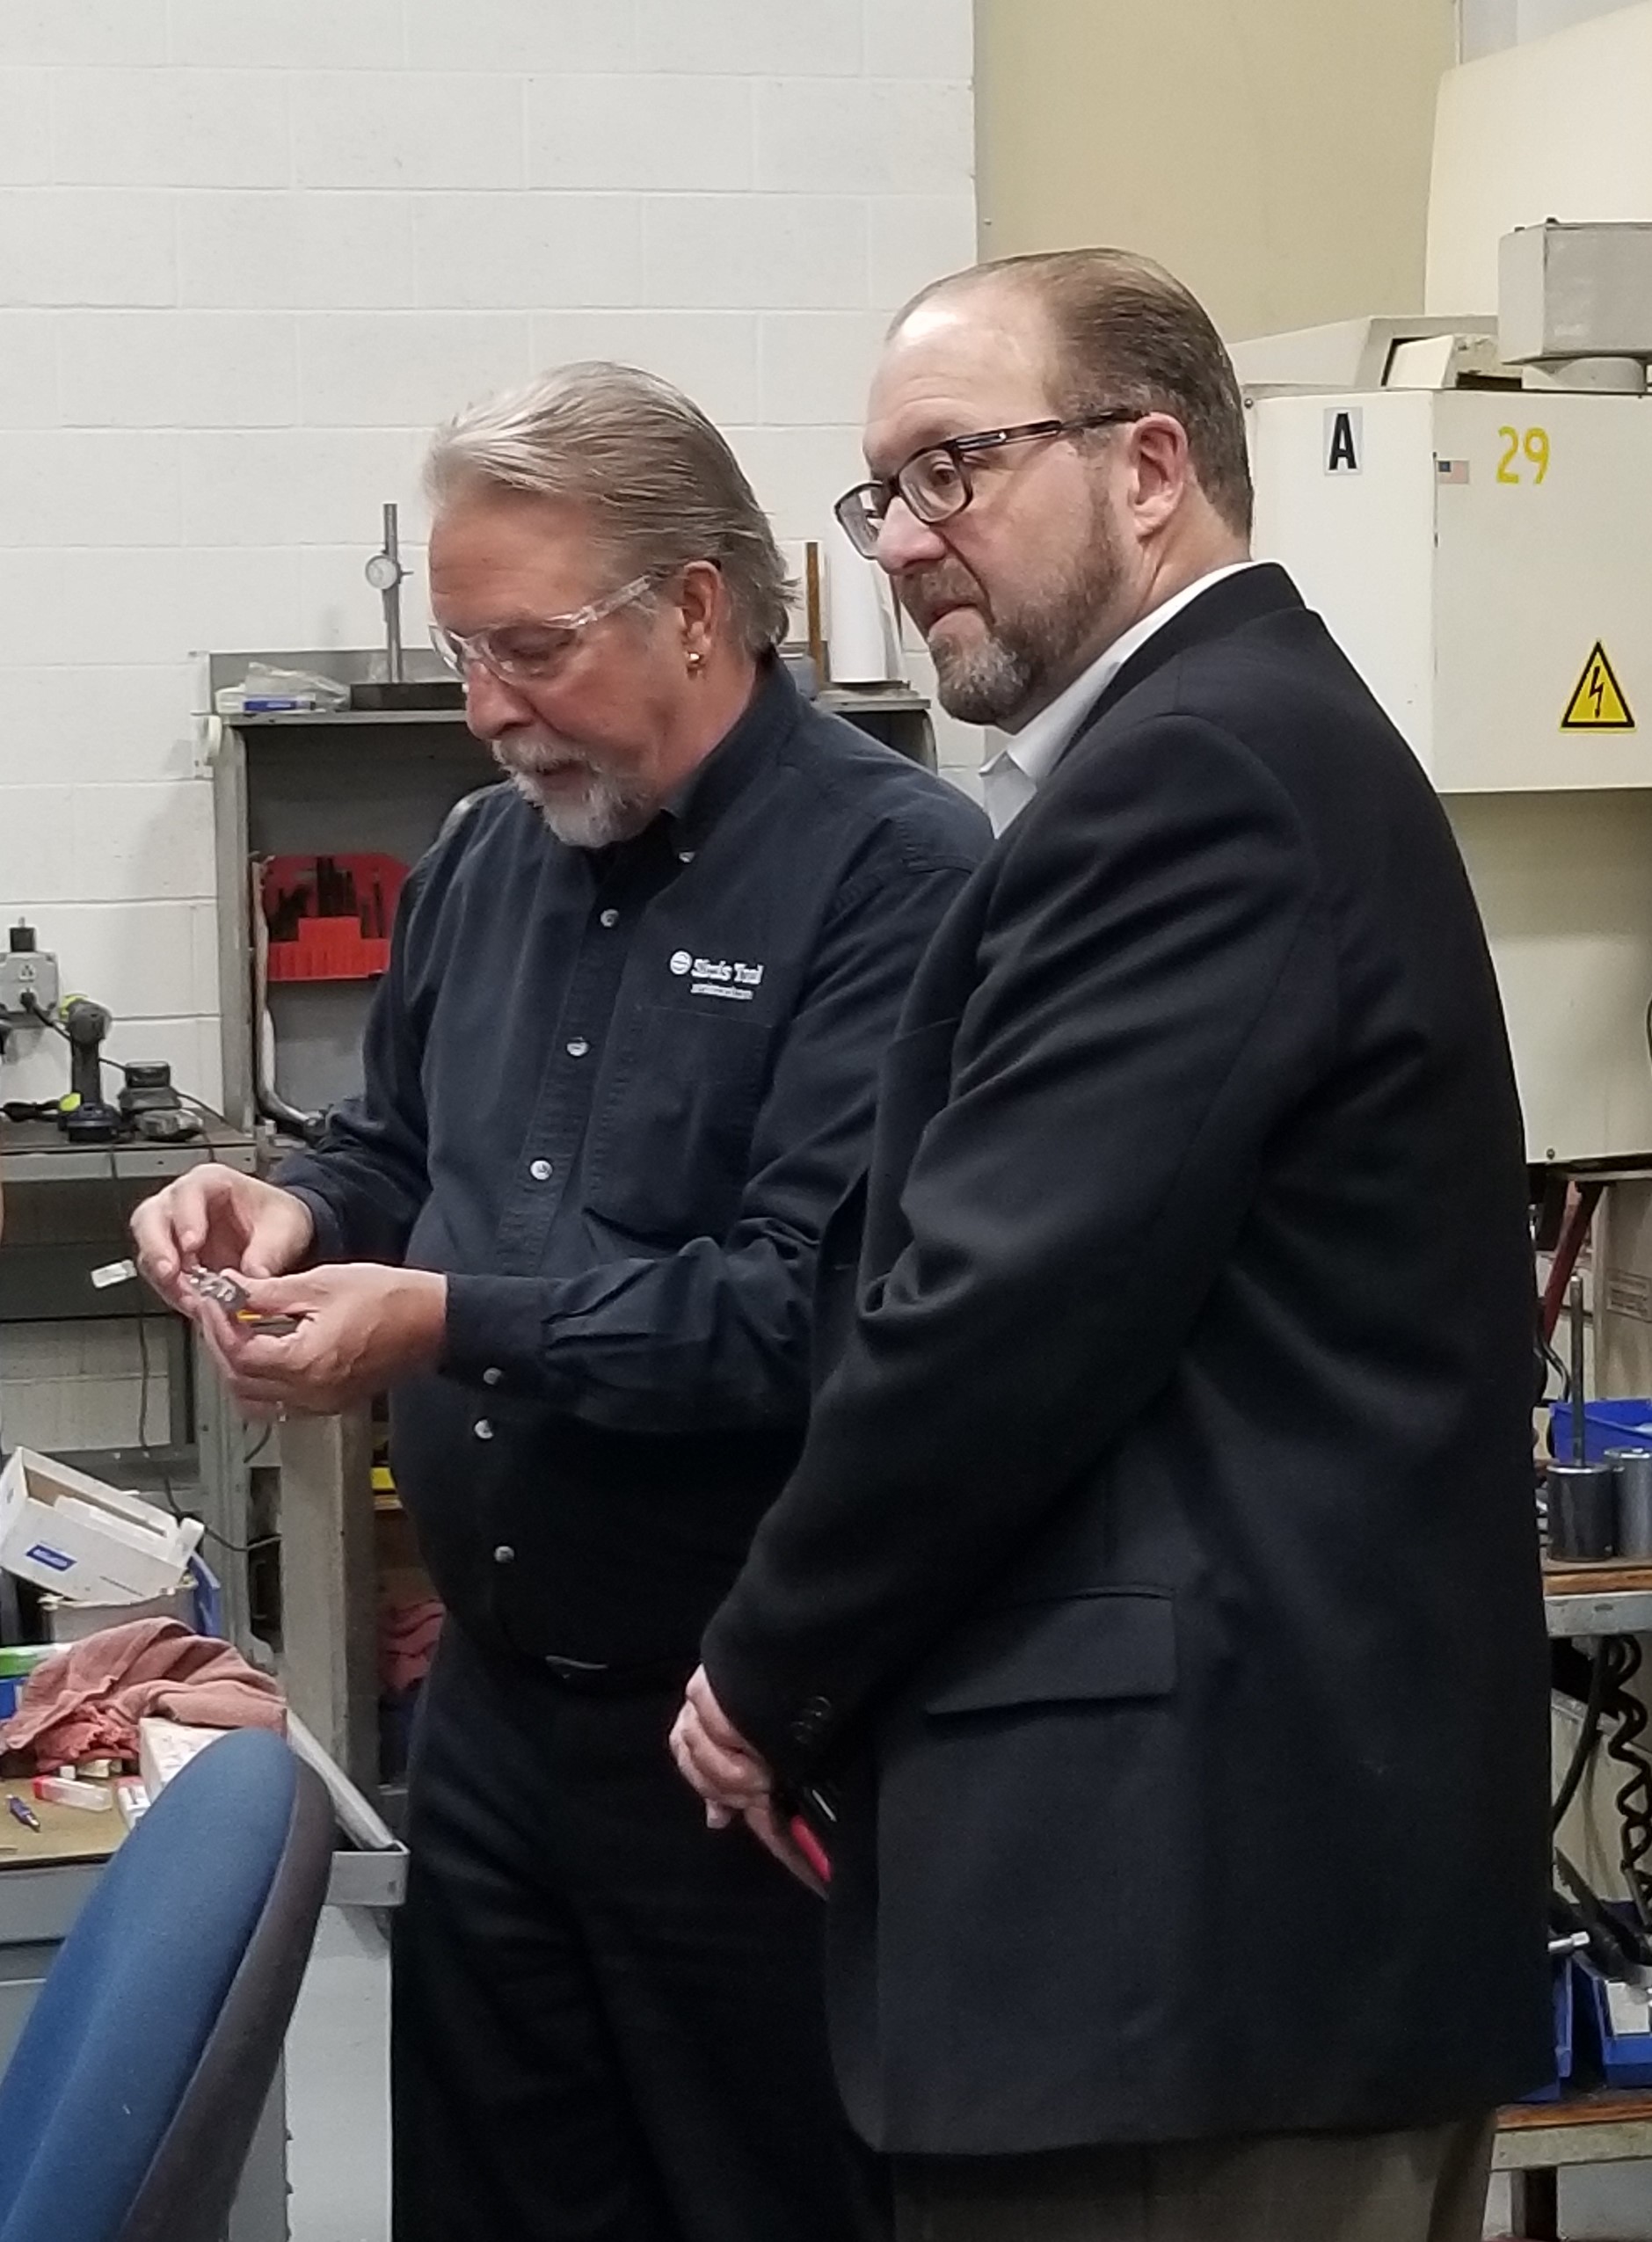 Connecticut’s Chief Manufacturing Officer Visits Sirois Tool